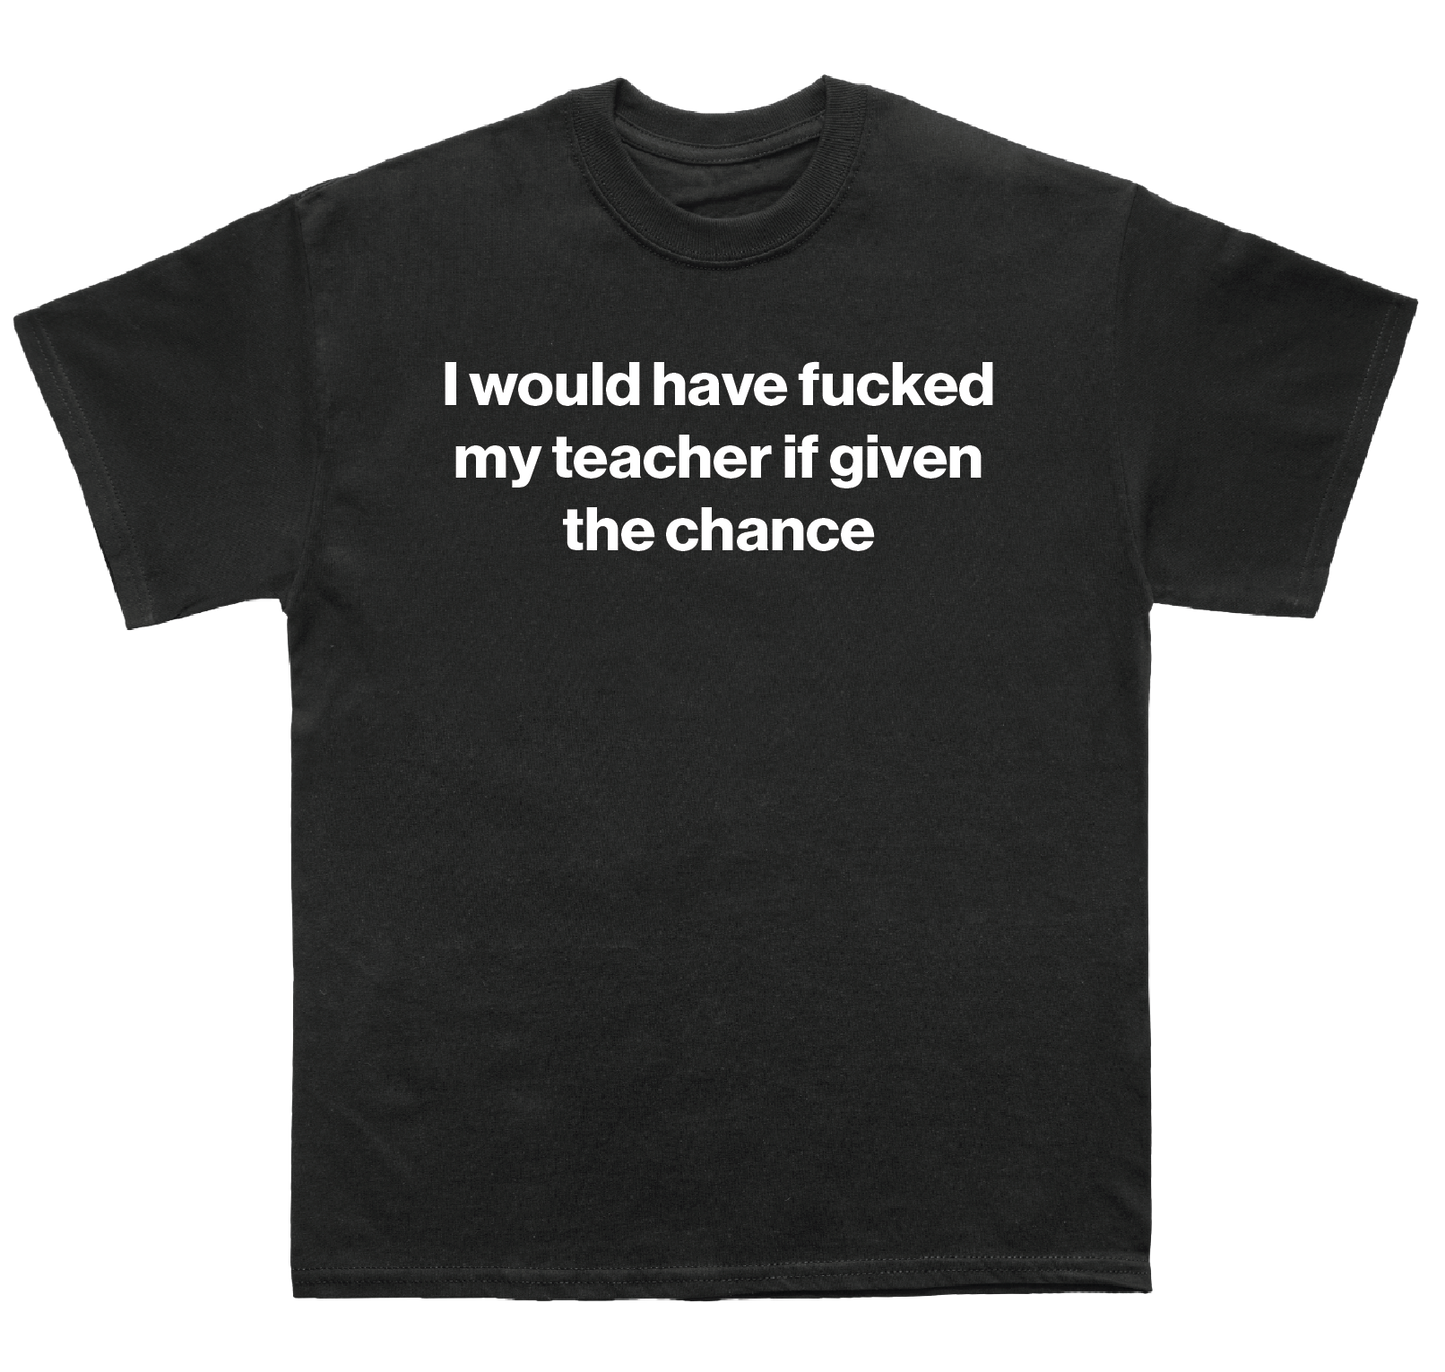 I would have fucked my teacher if given the chance shirt